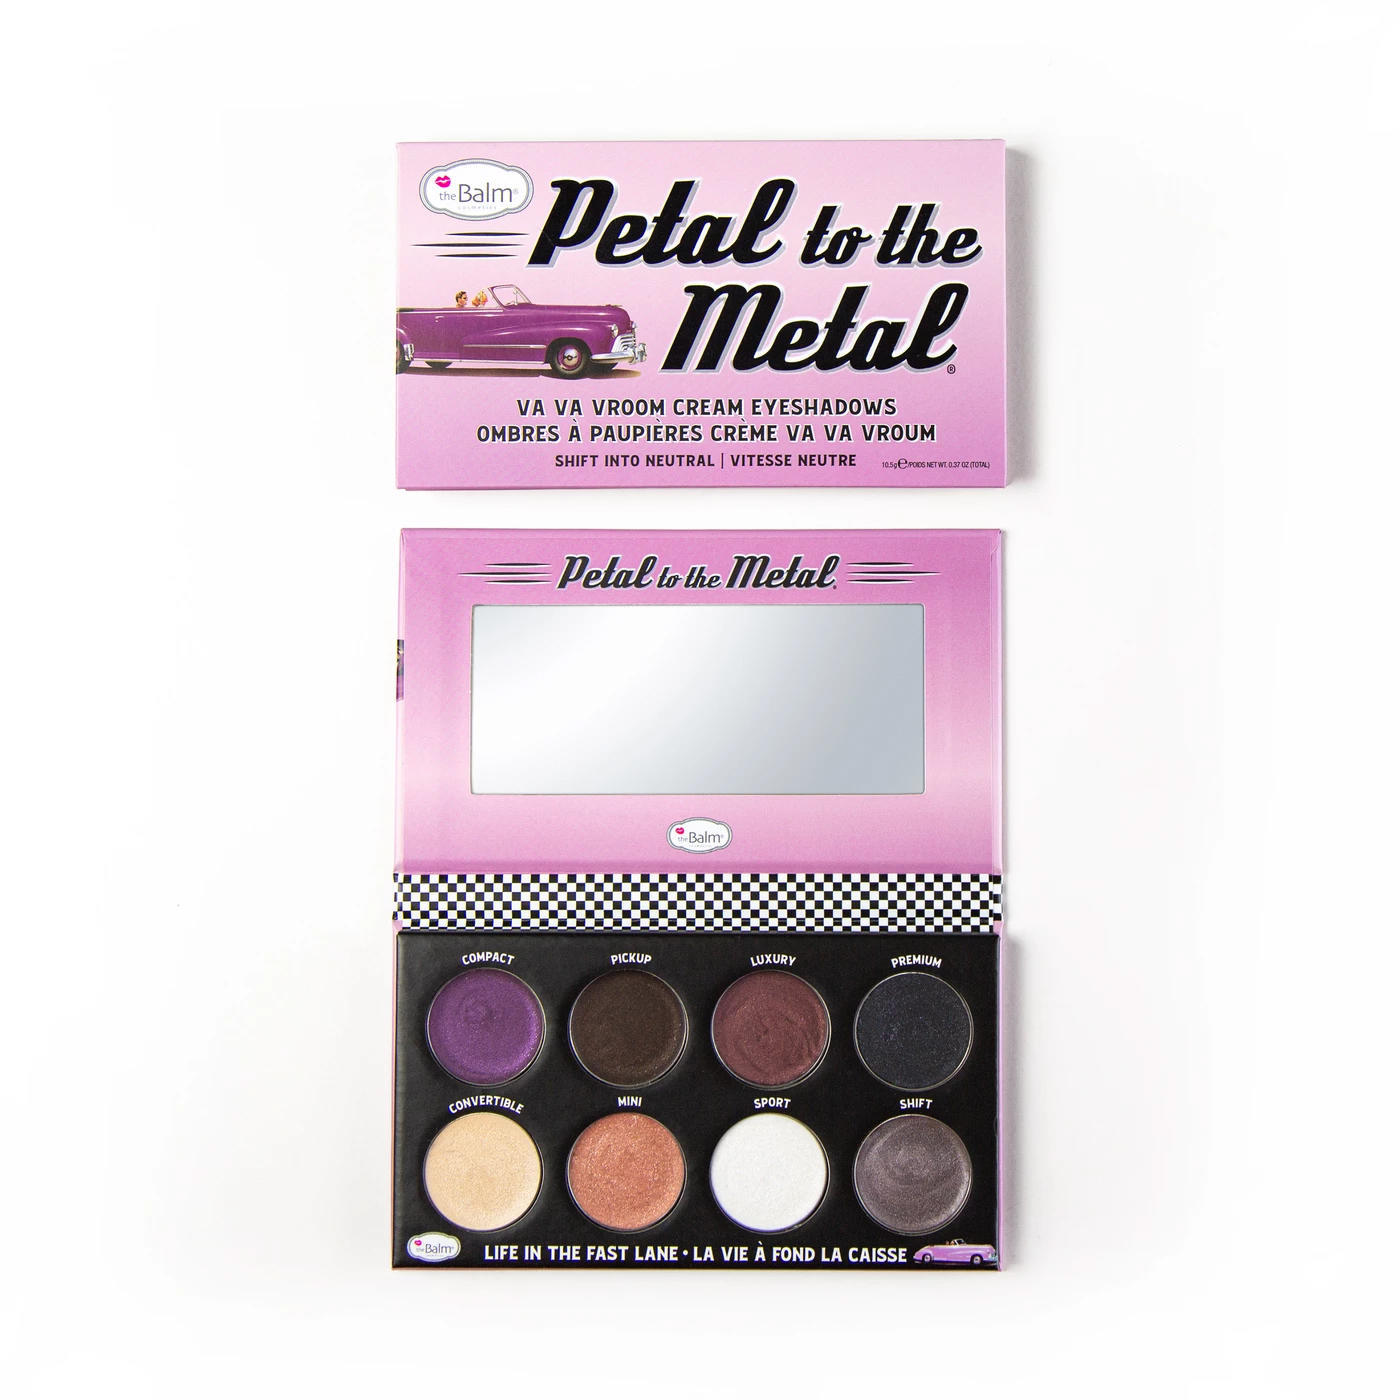 The Balm Petal To The Metal Shift Into Neutral Eyeshadow Palette